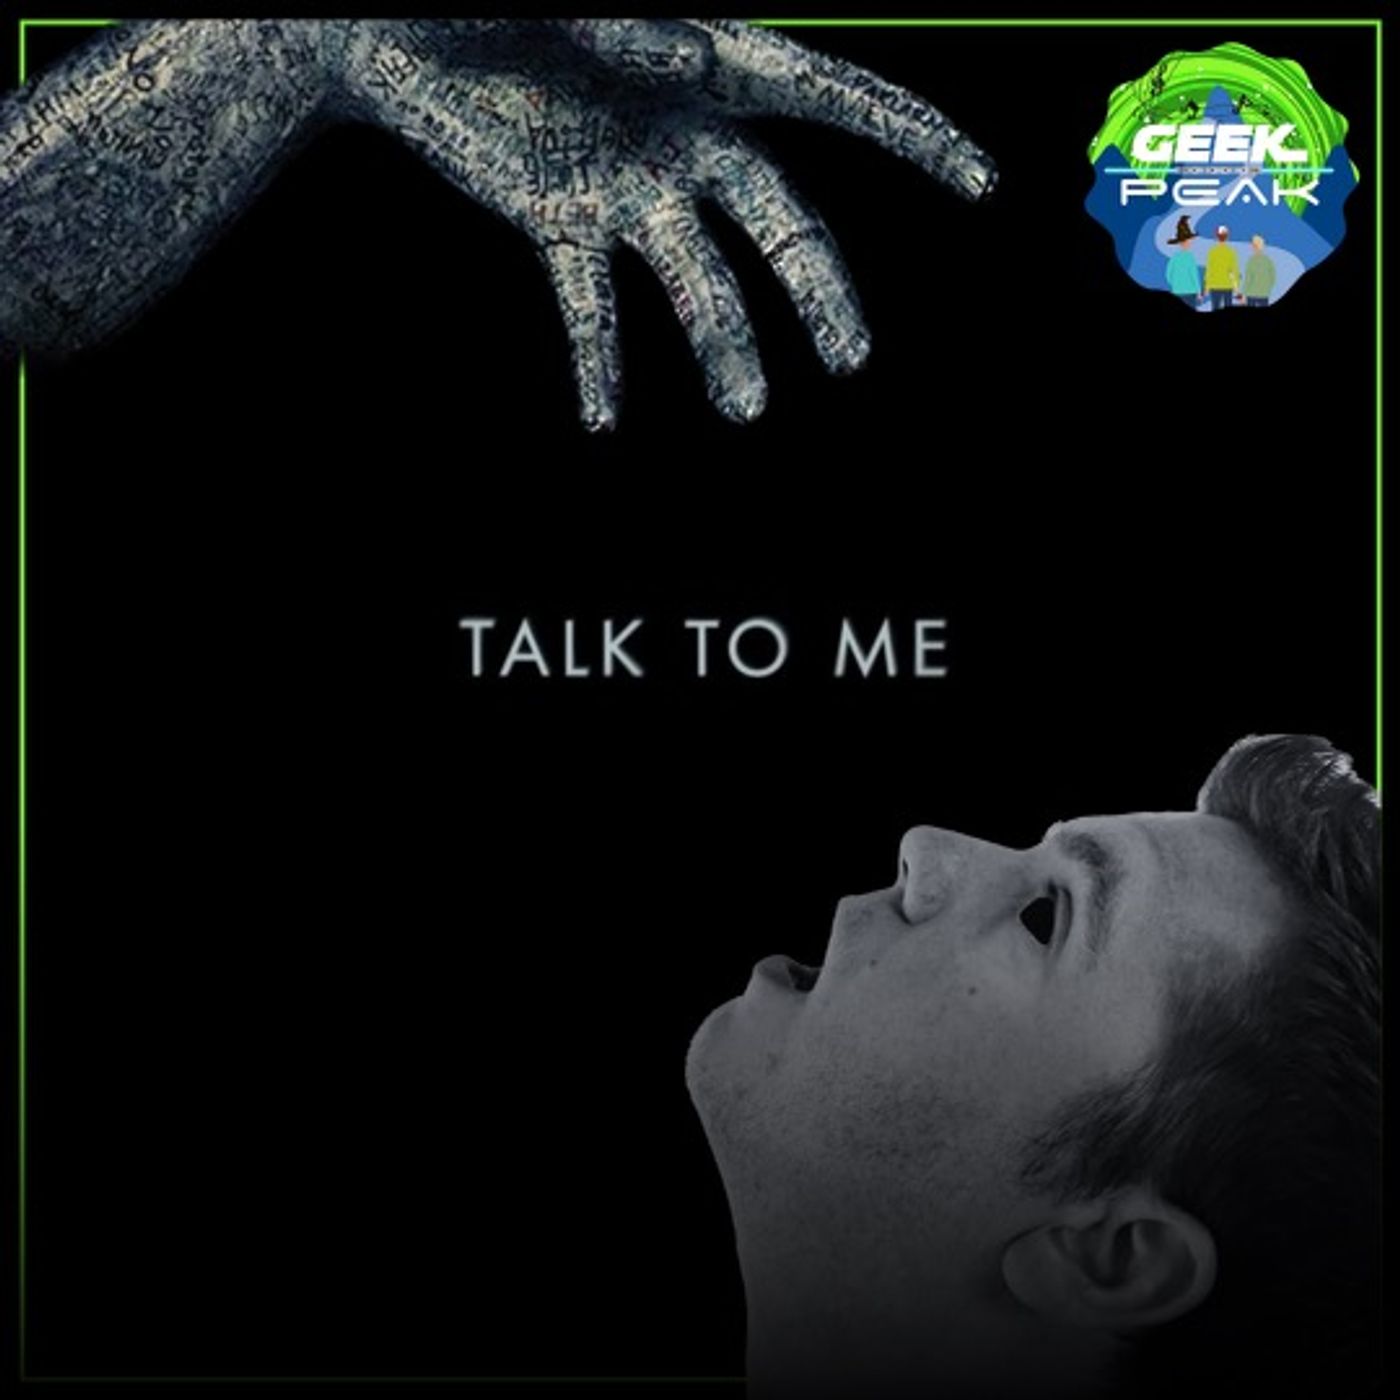 Talk to Me Film Review